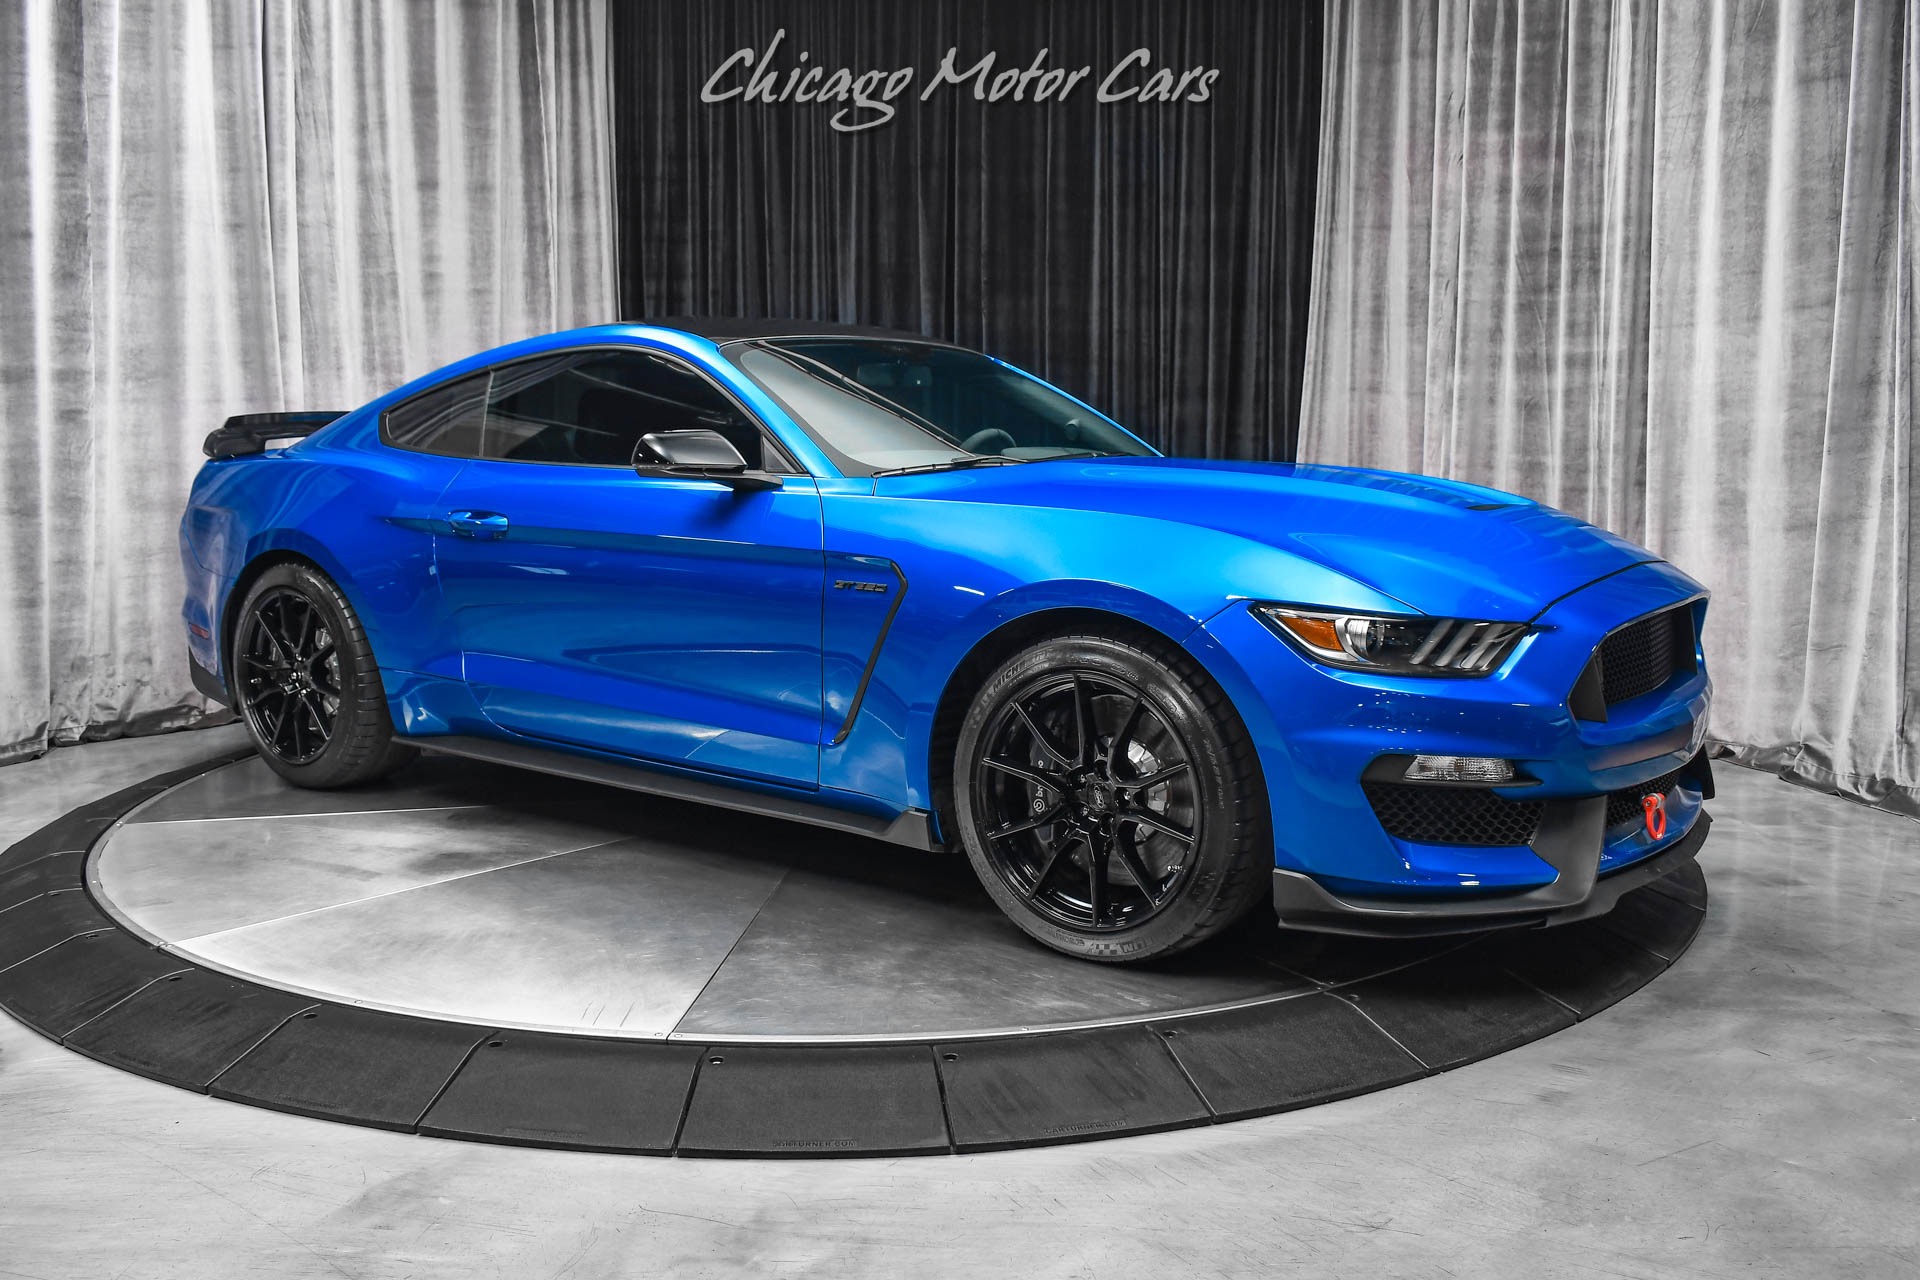 Used-2019-Ford-Mustang-Shelby-GT350-6-Speed-Manual-Flat-plane-526HP-Collectible-New-Tires